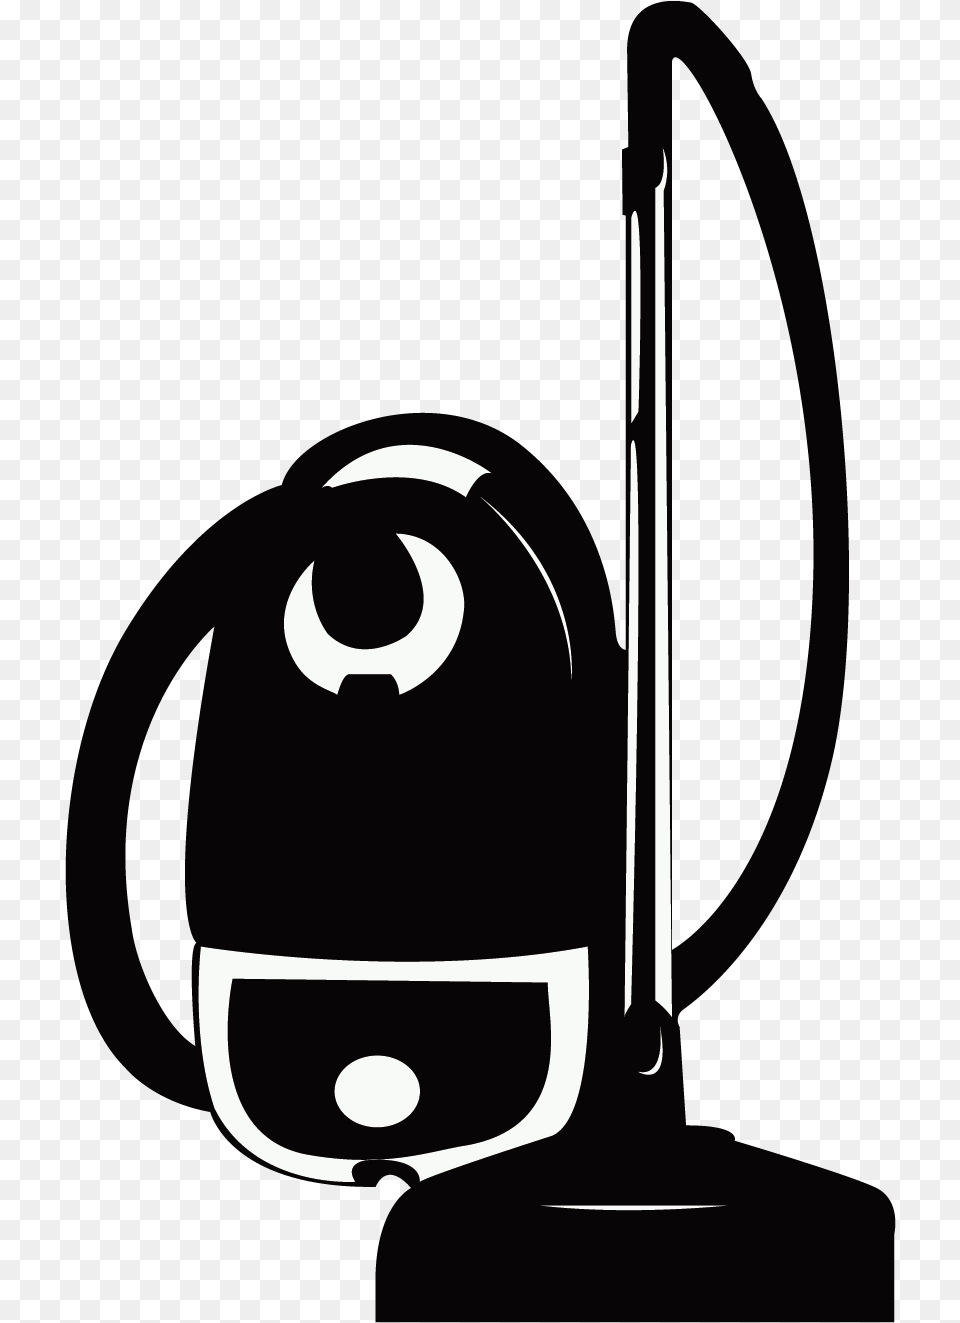 Silhouette At Getdrawings Com Free For Personal Vacuum Cleaner Vector, Appliance, Device, Electrical Device, Vacuum Cleaner Png Image